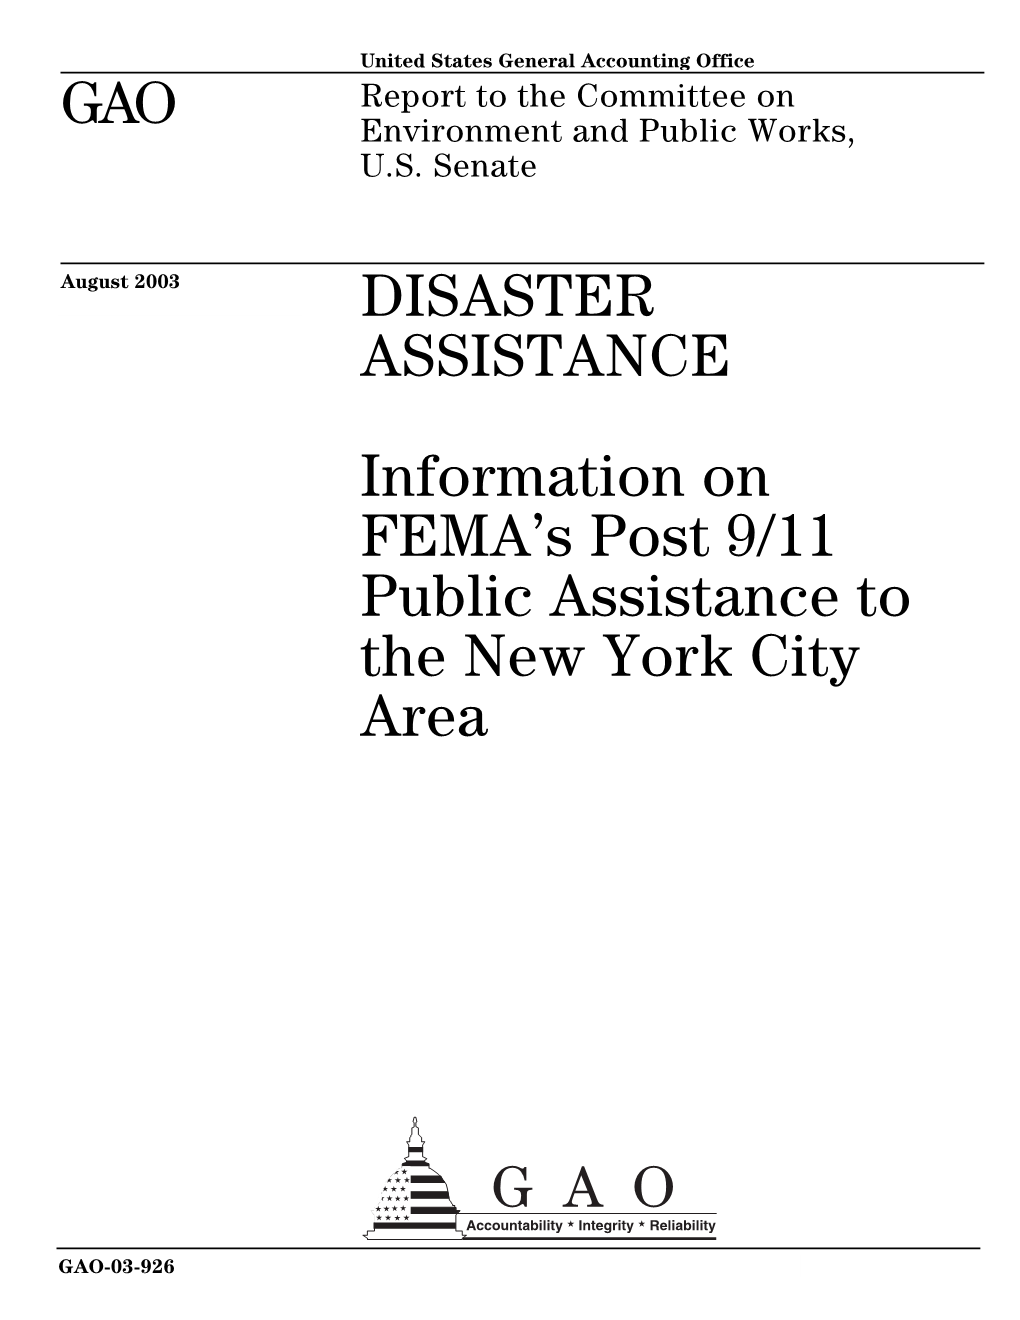 GAO-03-926 Disaster Assistance